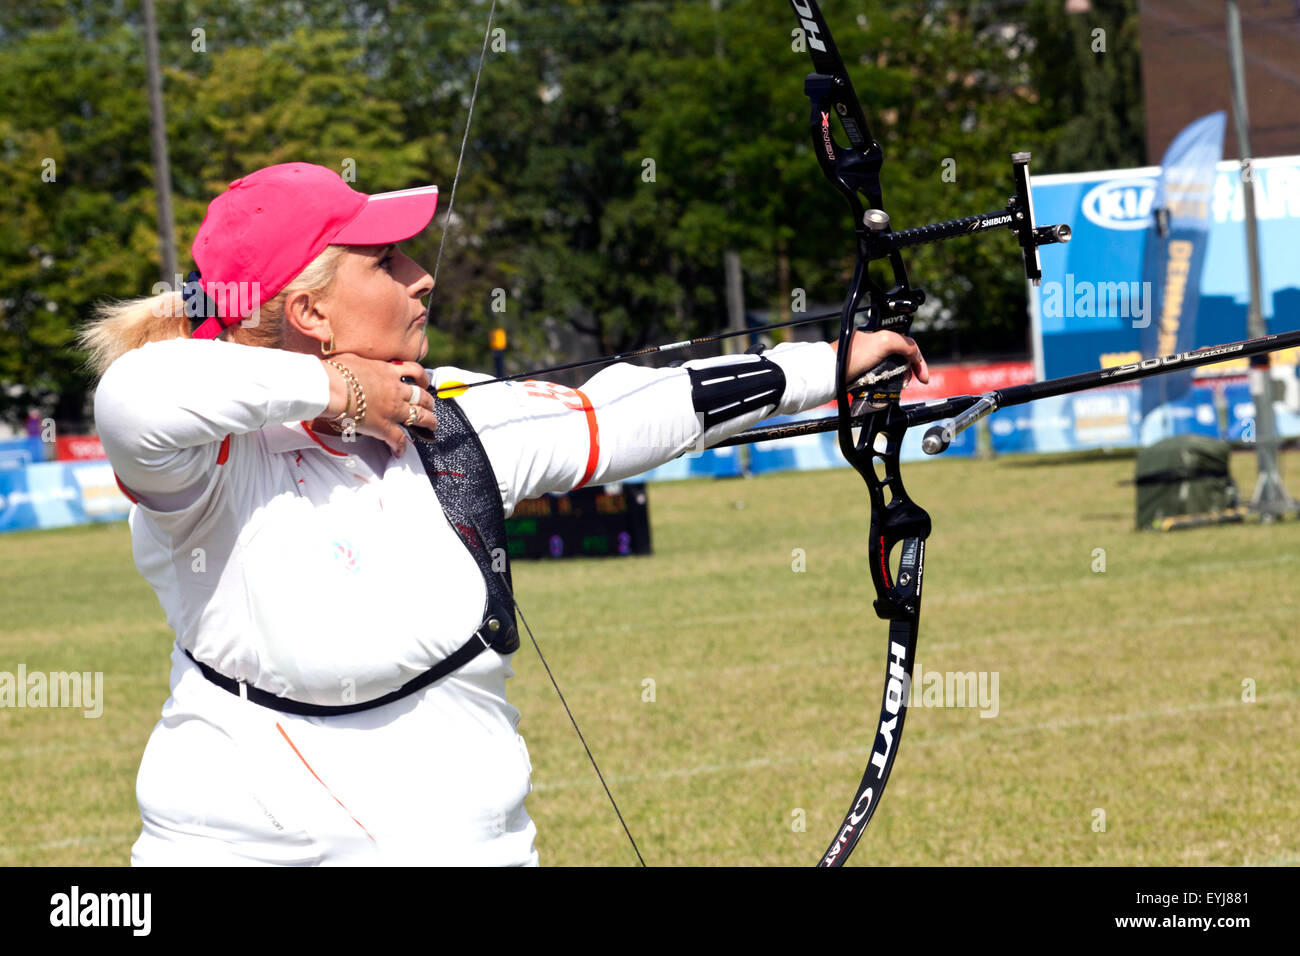 Copenhagen, Denmark, July 30th, 2015: Khatuna Narimanidze of Georgia competes in the World Archery Championships in Copenhagen during Thursday's individual matches  in recurve bow. Credit:  OJPHOTOS/Alamy Live News Stock Photo